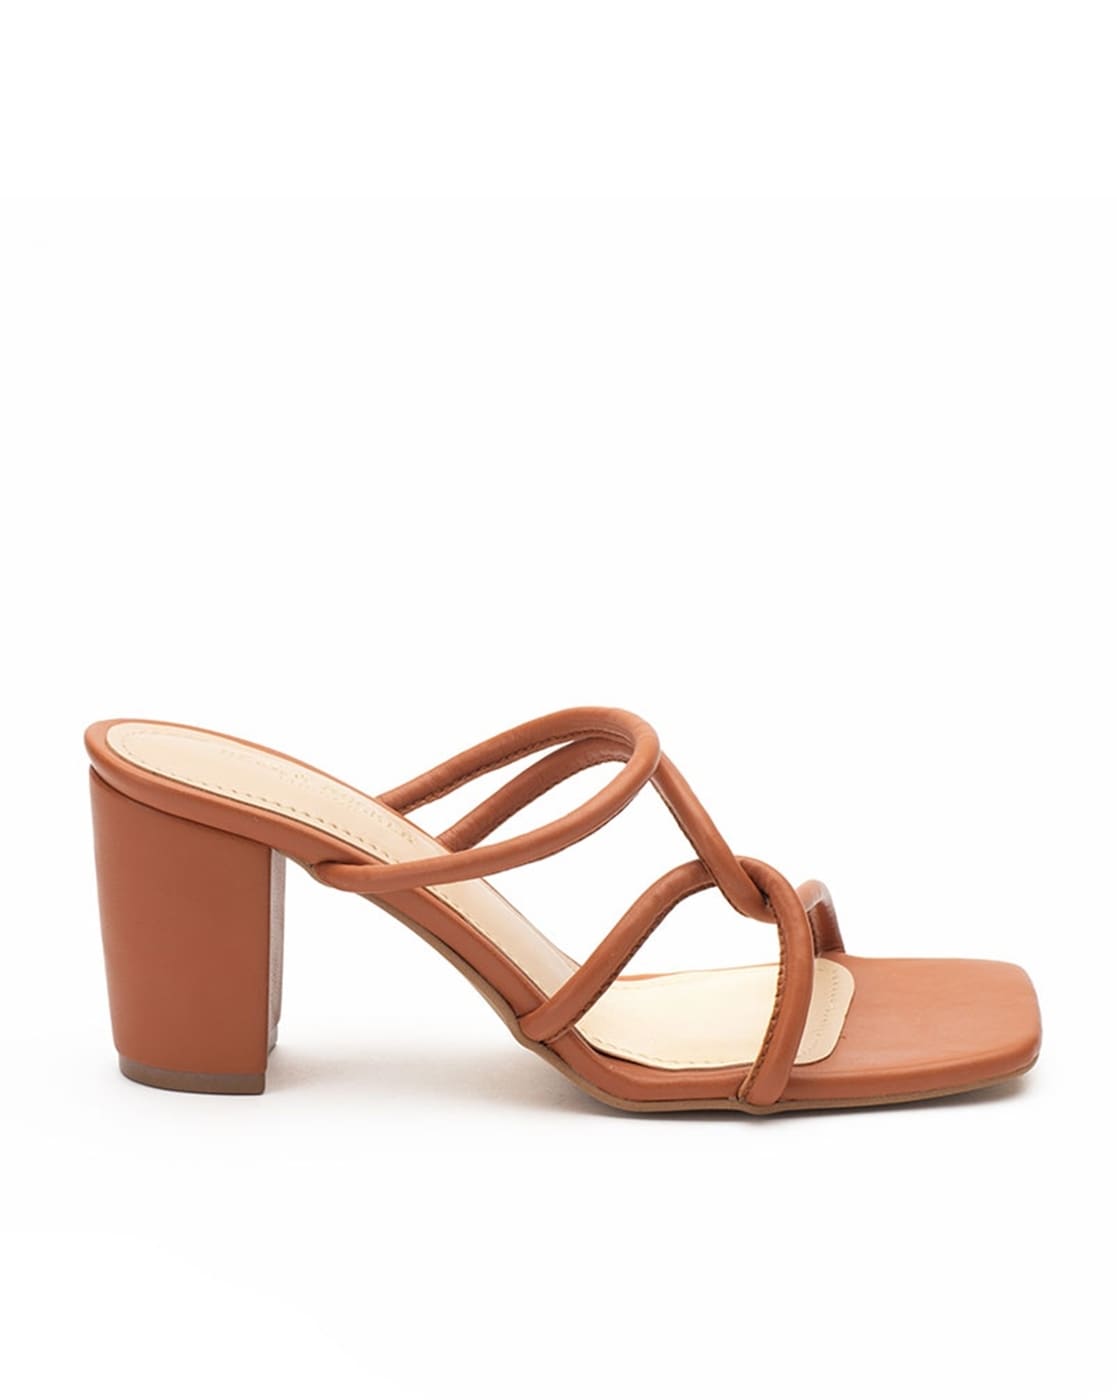 Buy Gold Women's Sandals - The Silo Gold | Tresmode